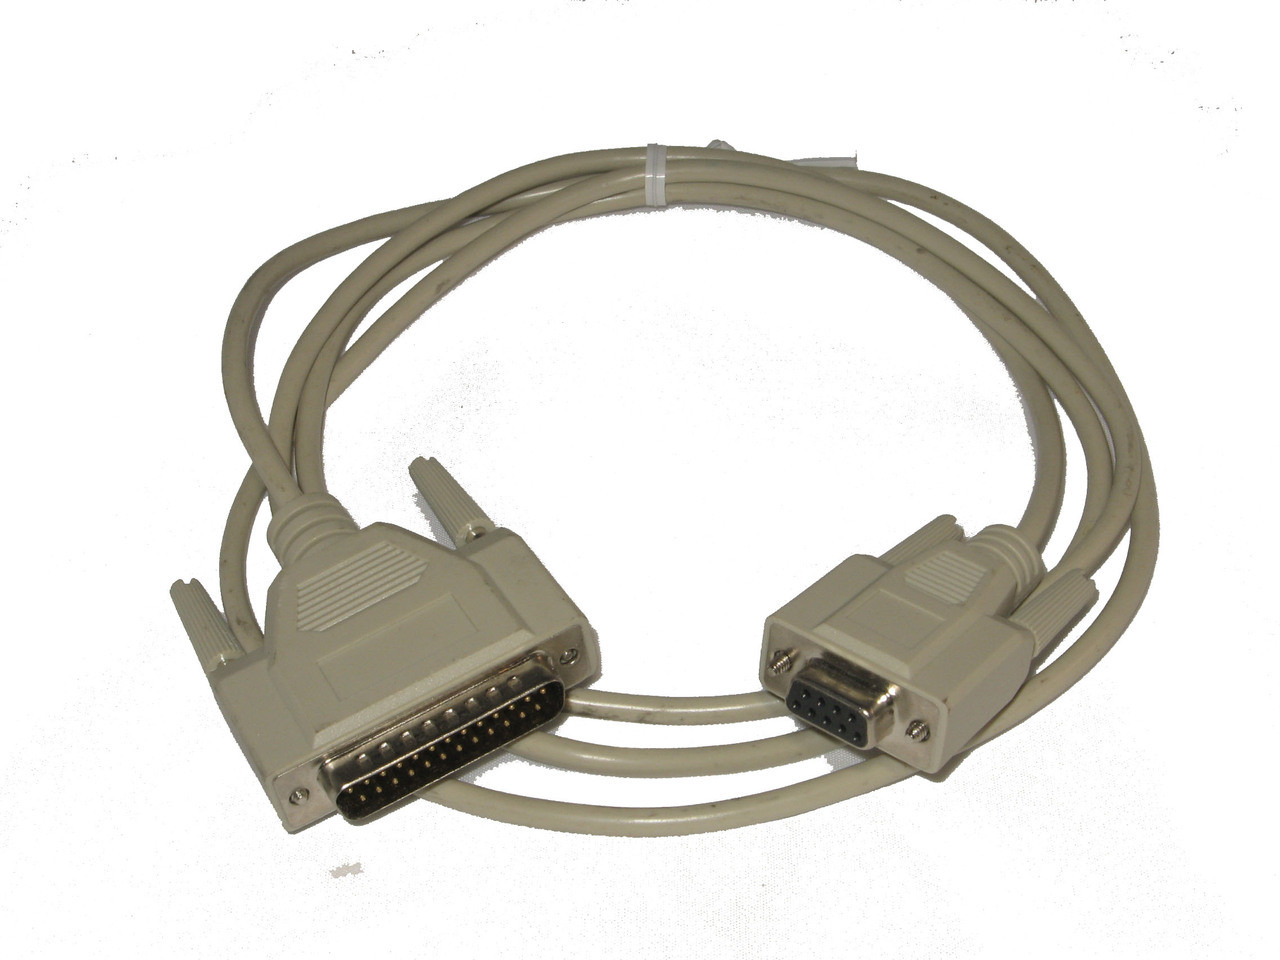 Serial Cable - Connects 9 Pin to RS232 GageMux® Interface; DB25-M to DB9-F;  6 foot length